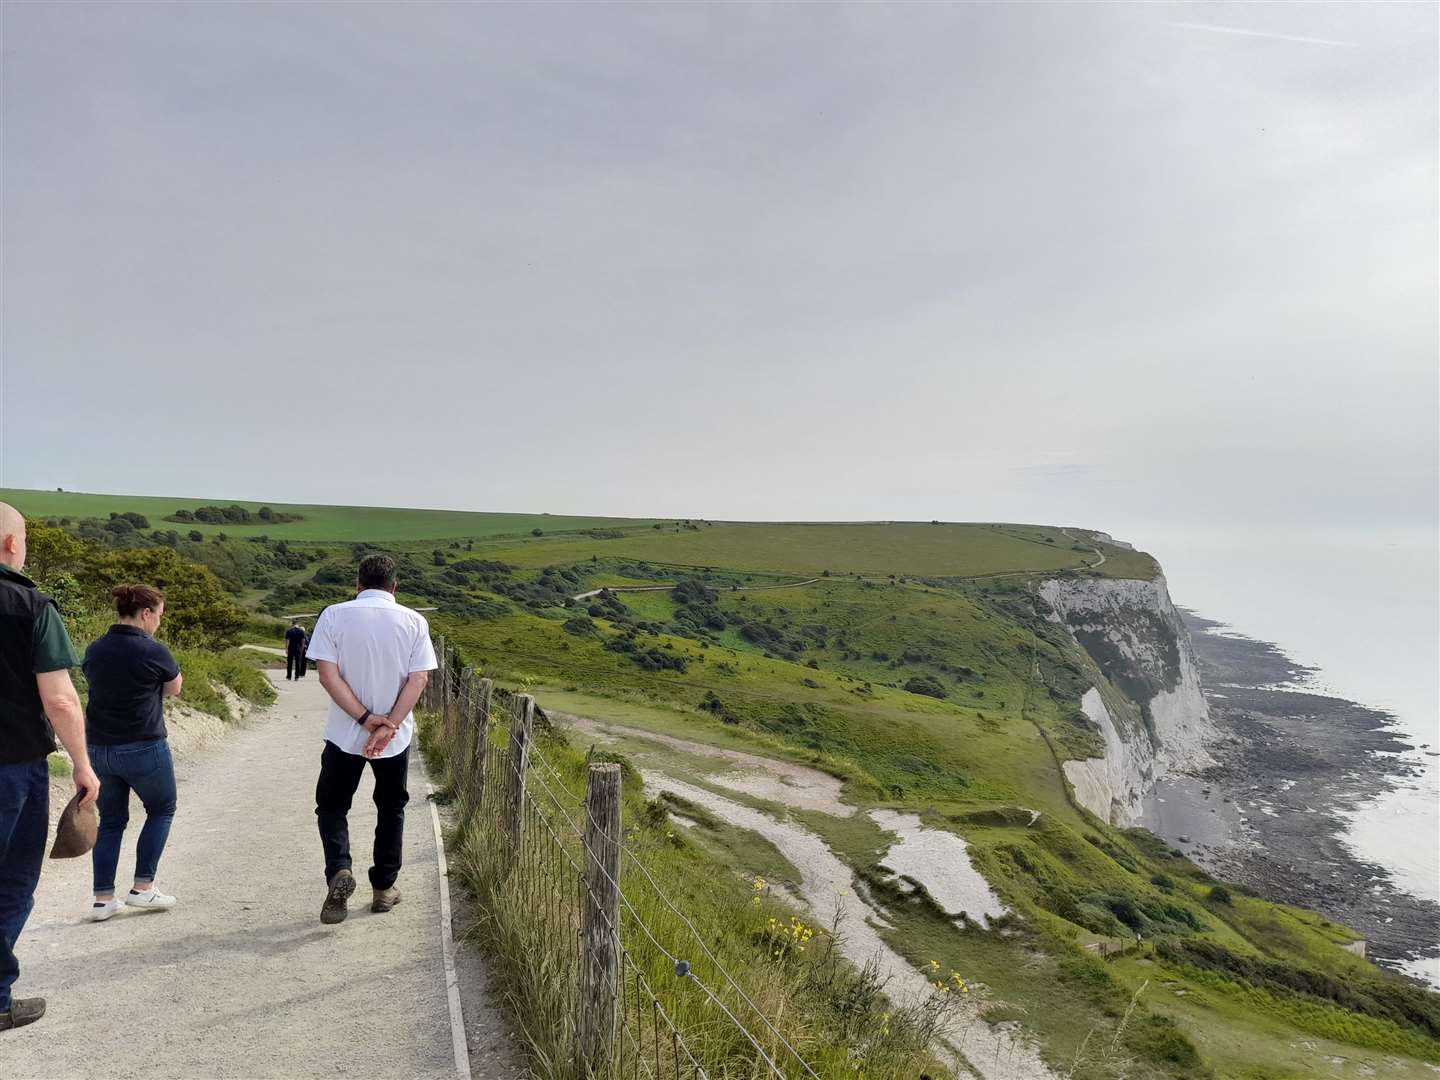 £150,000 was spent on the project at the iconic cliffs